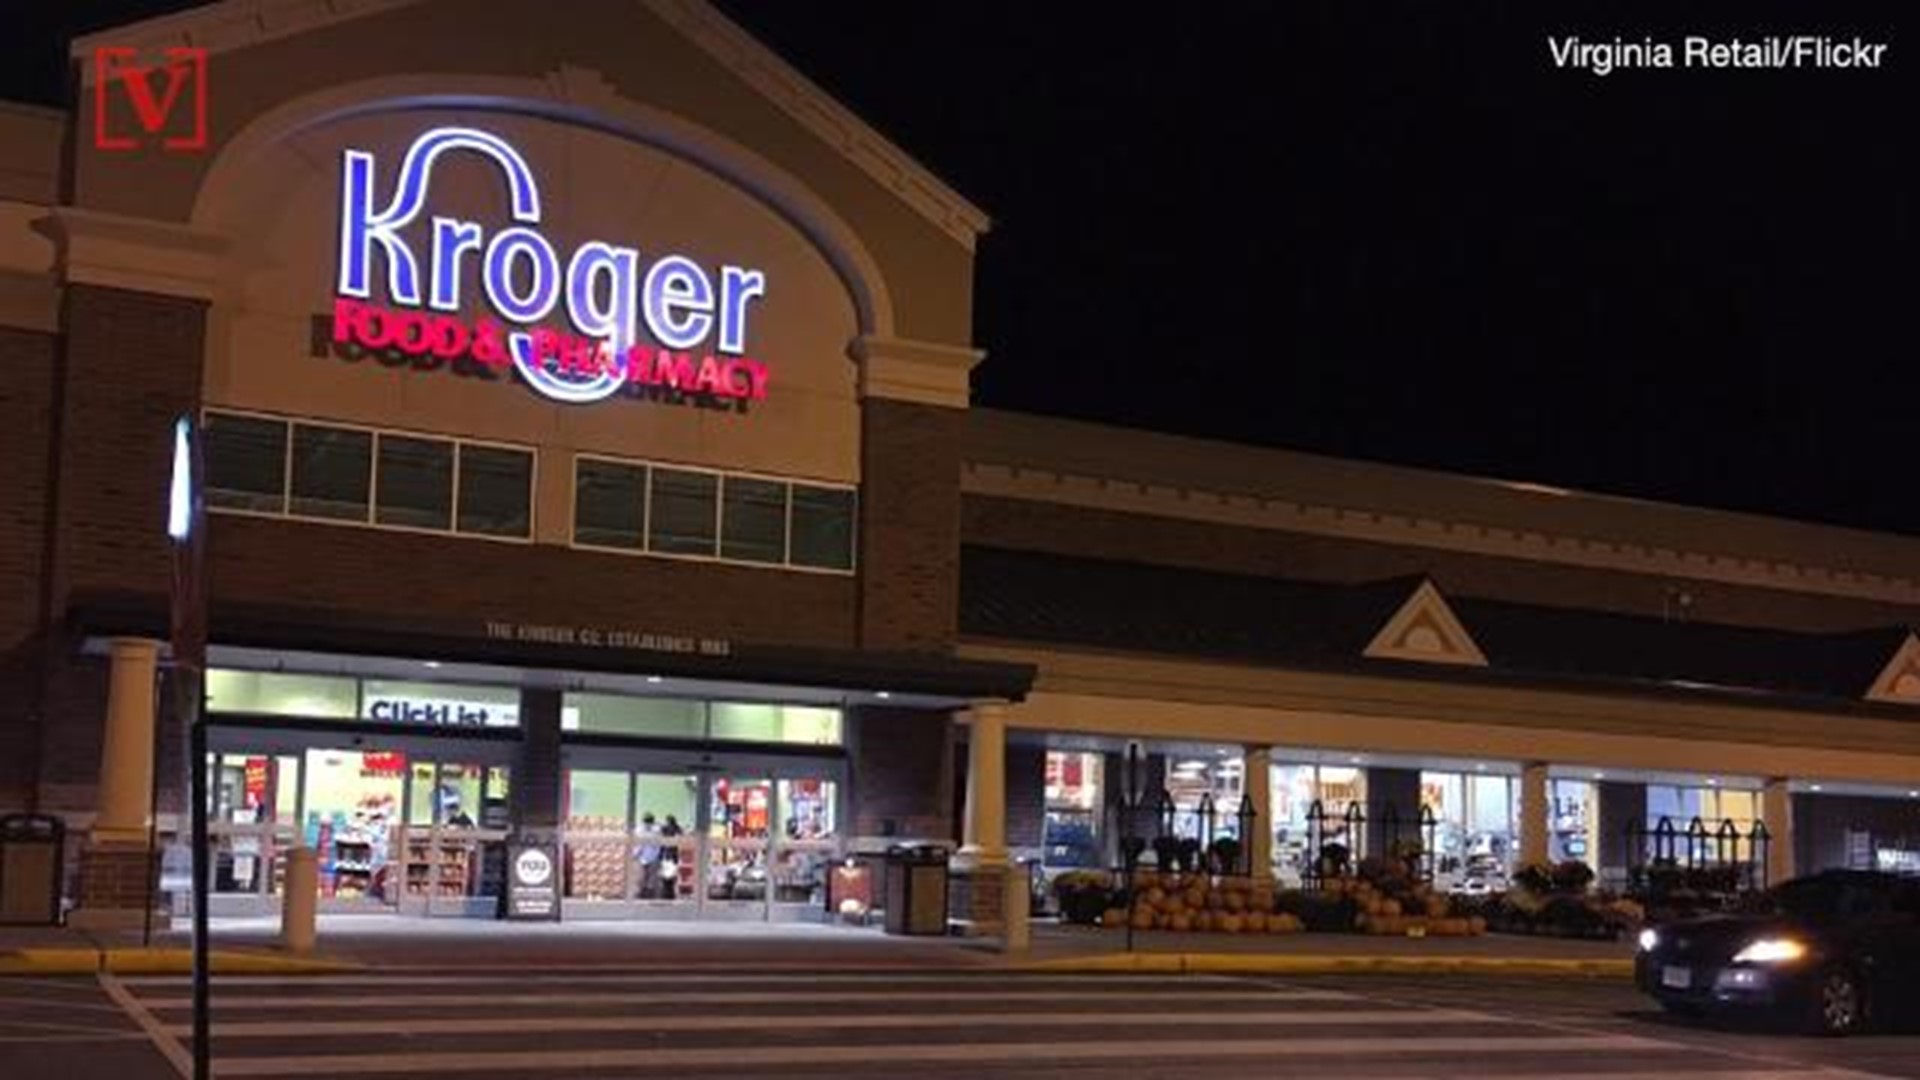 Retail giants Kroger and Target are in merger talks